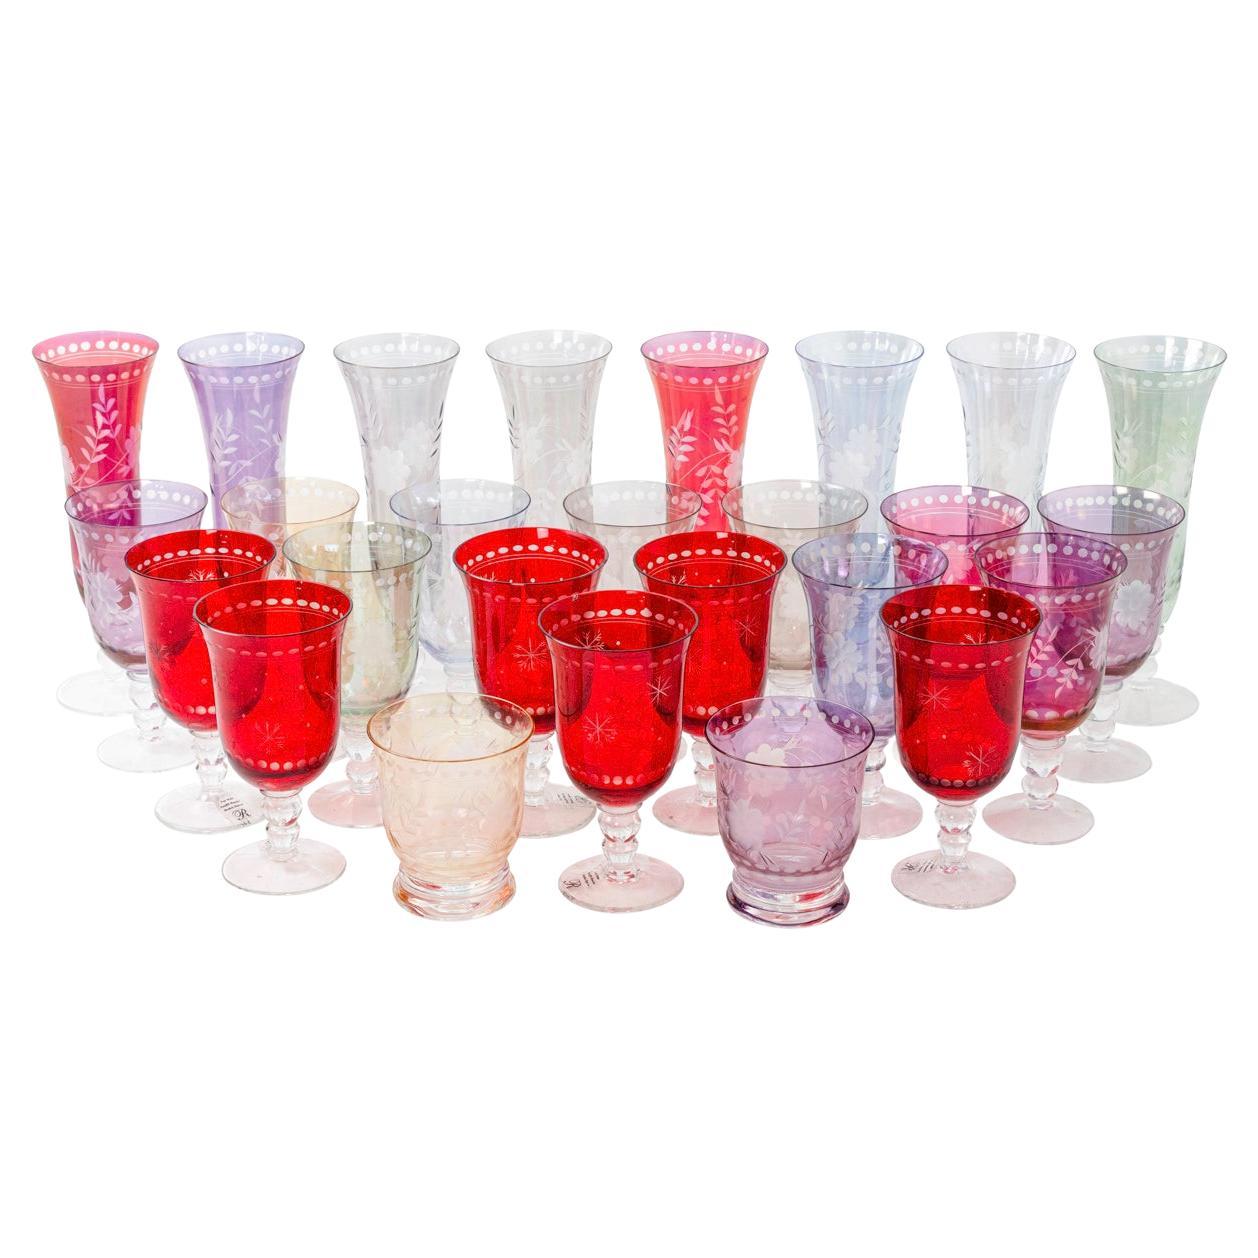 Bohemian crystal style glassware set, contemporary work For Sale